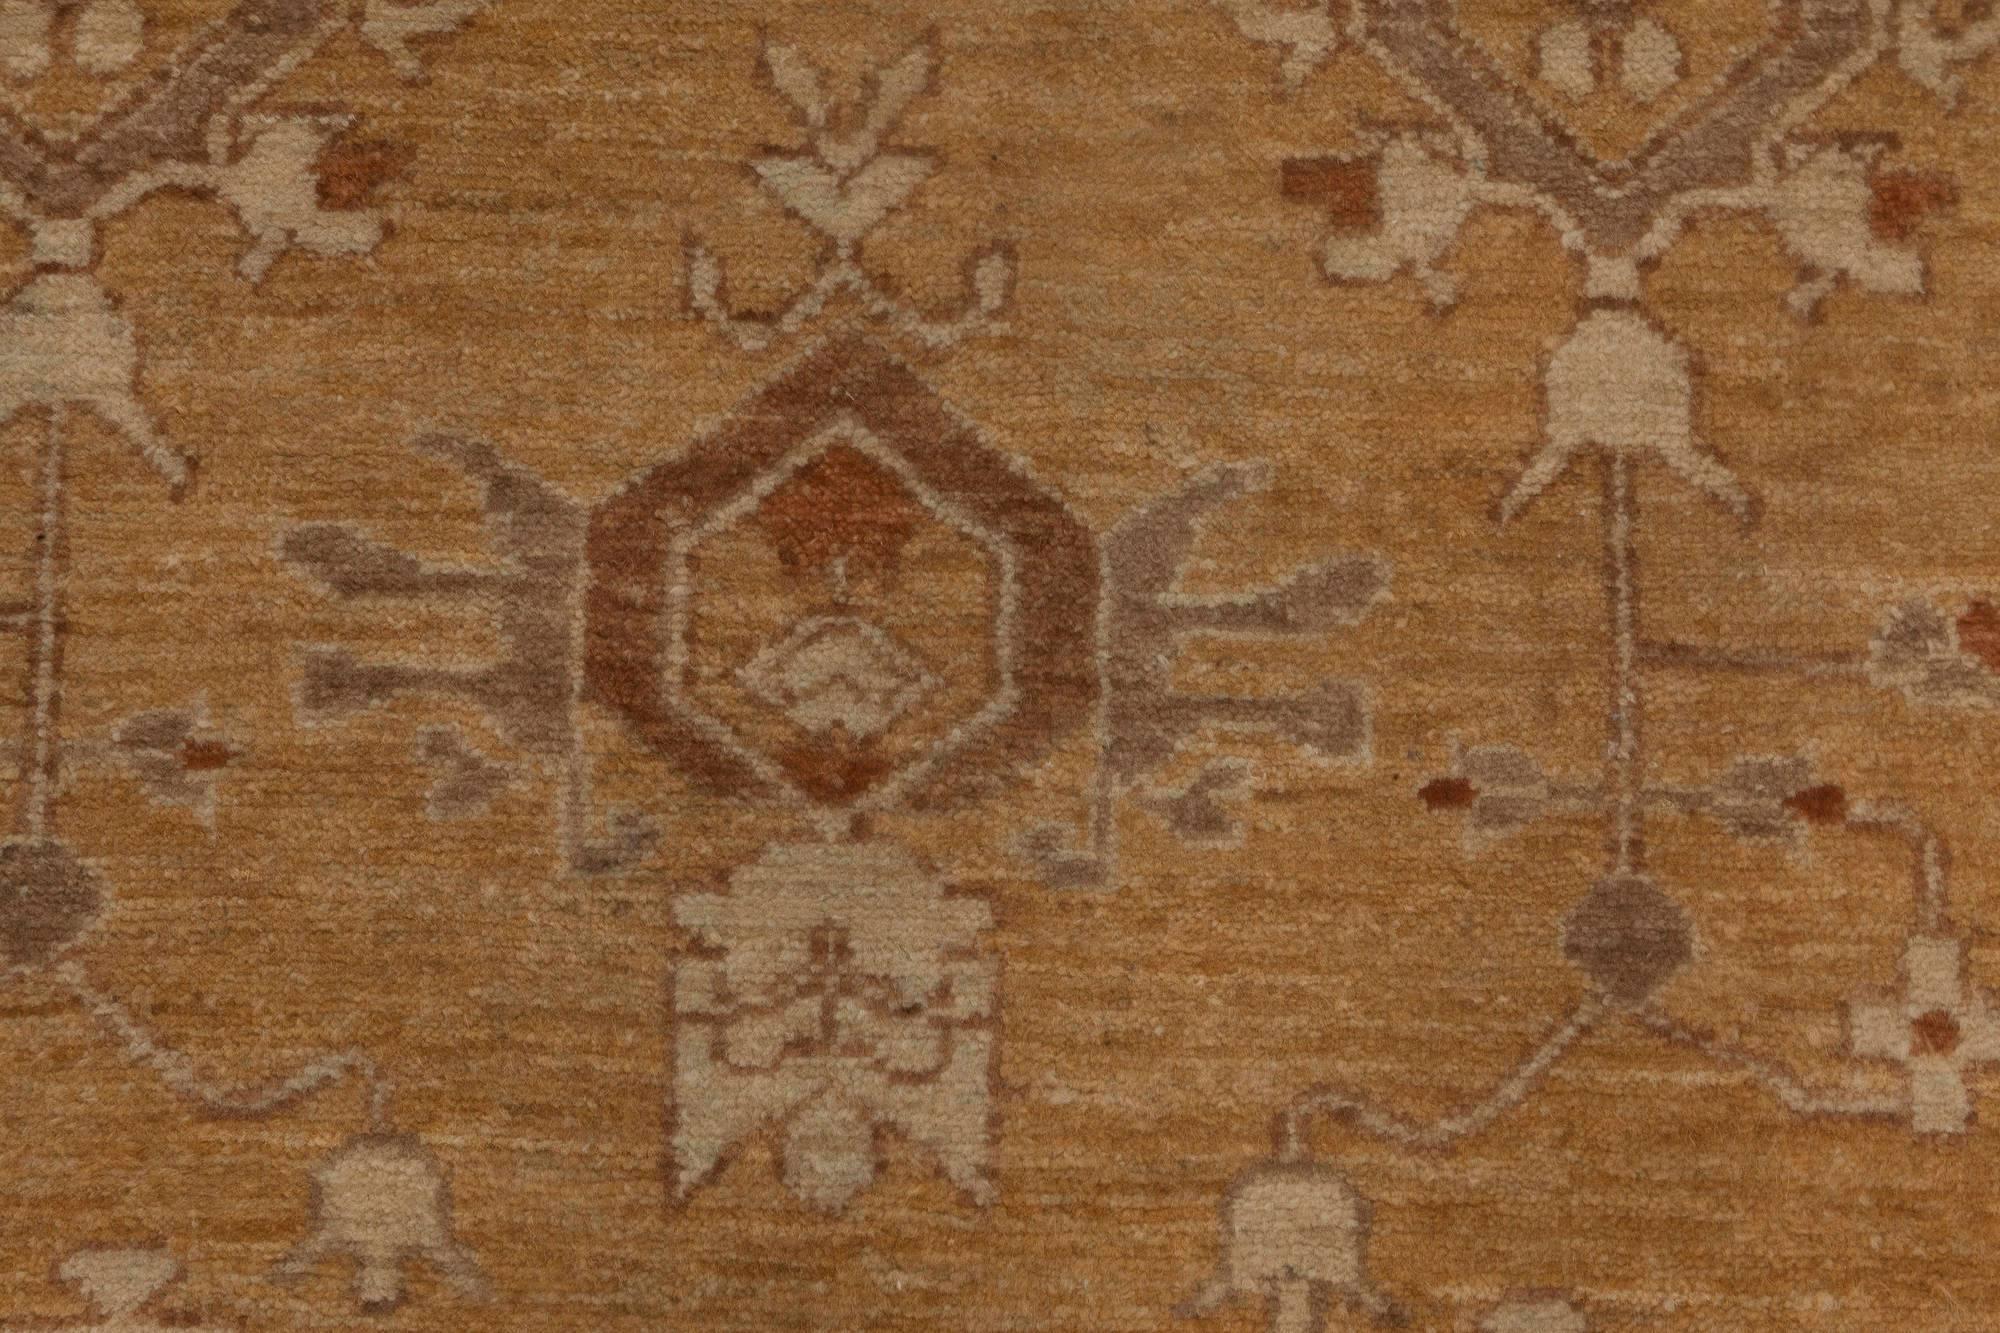 Indian Traditional Inspired Tabriz Rug in Beige and Brown by Doris Leslie Blau For Sale